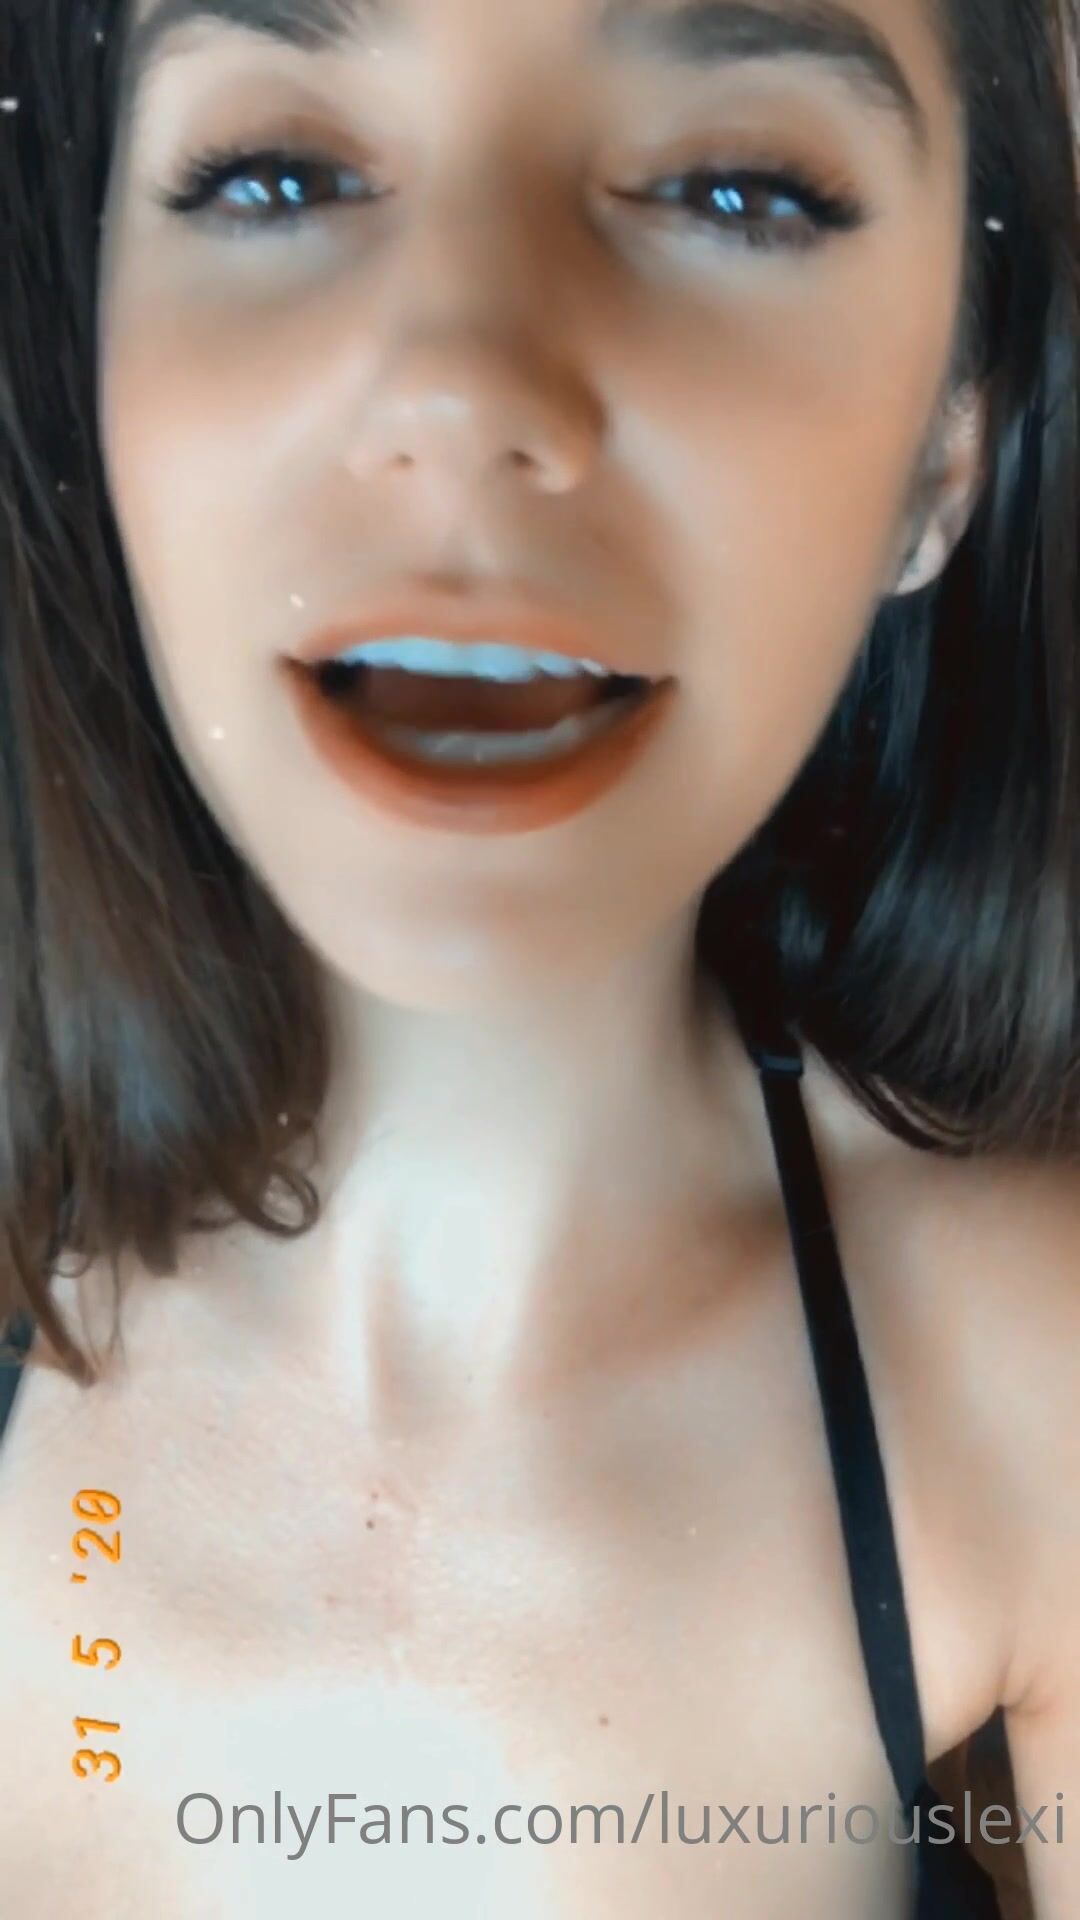 LuxuriousLexi - “Edge to this 12 min JOI Clip I was in the mood to”